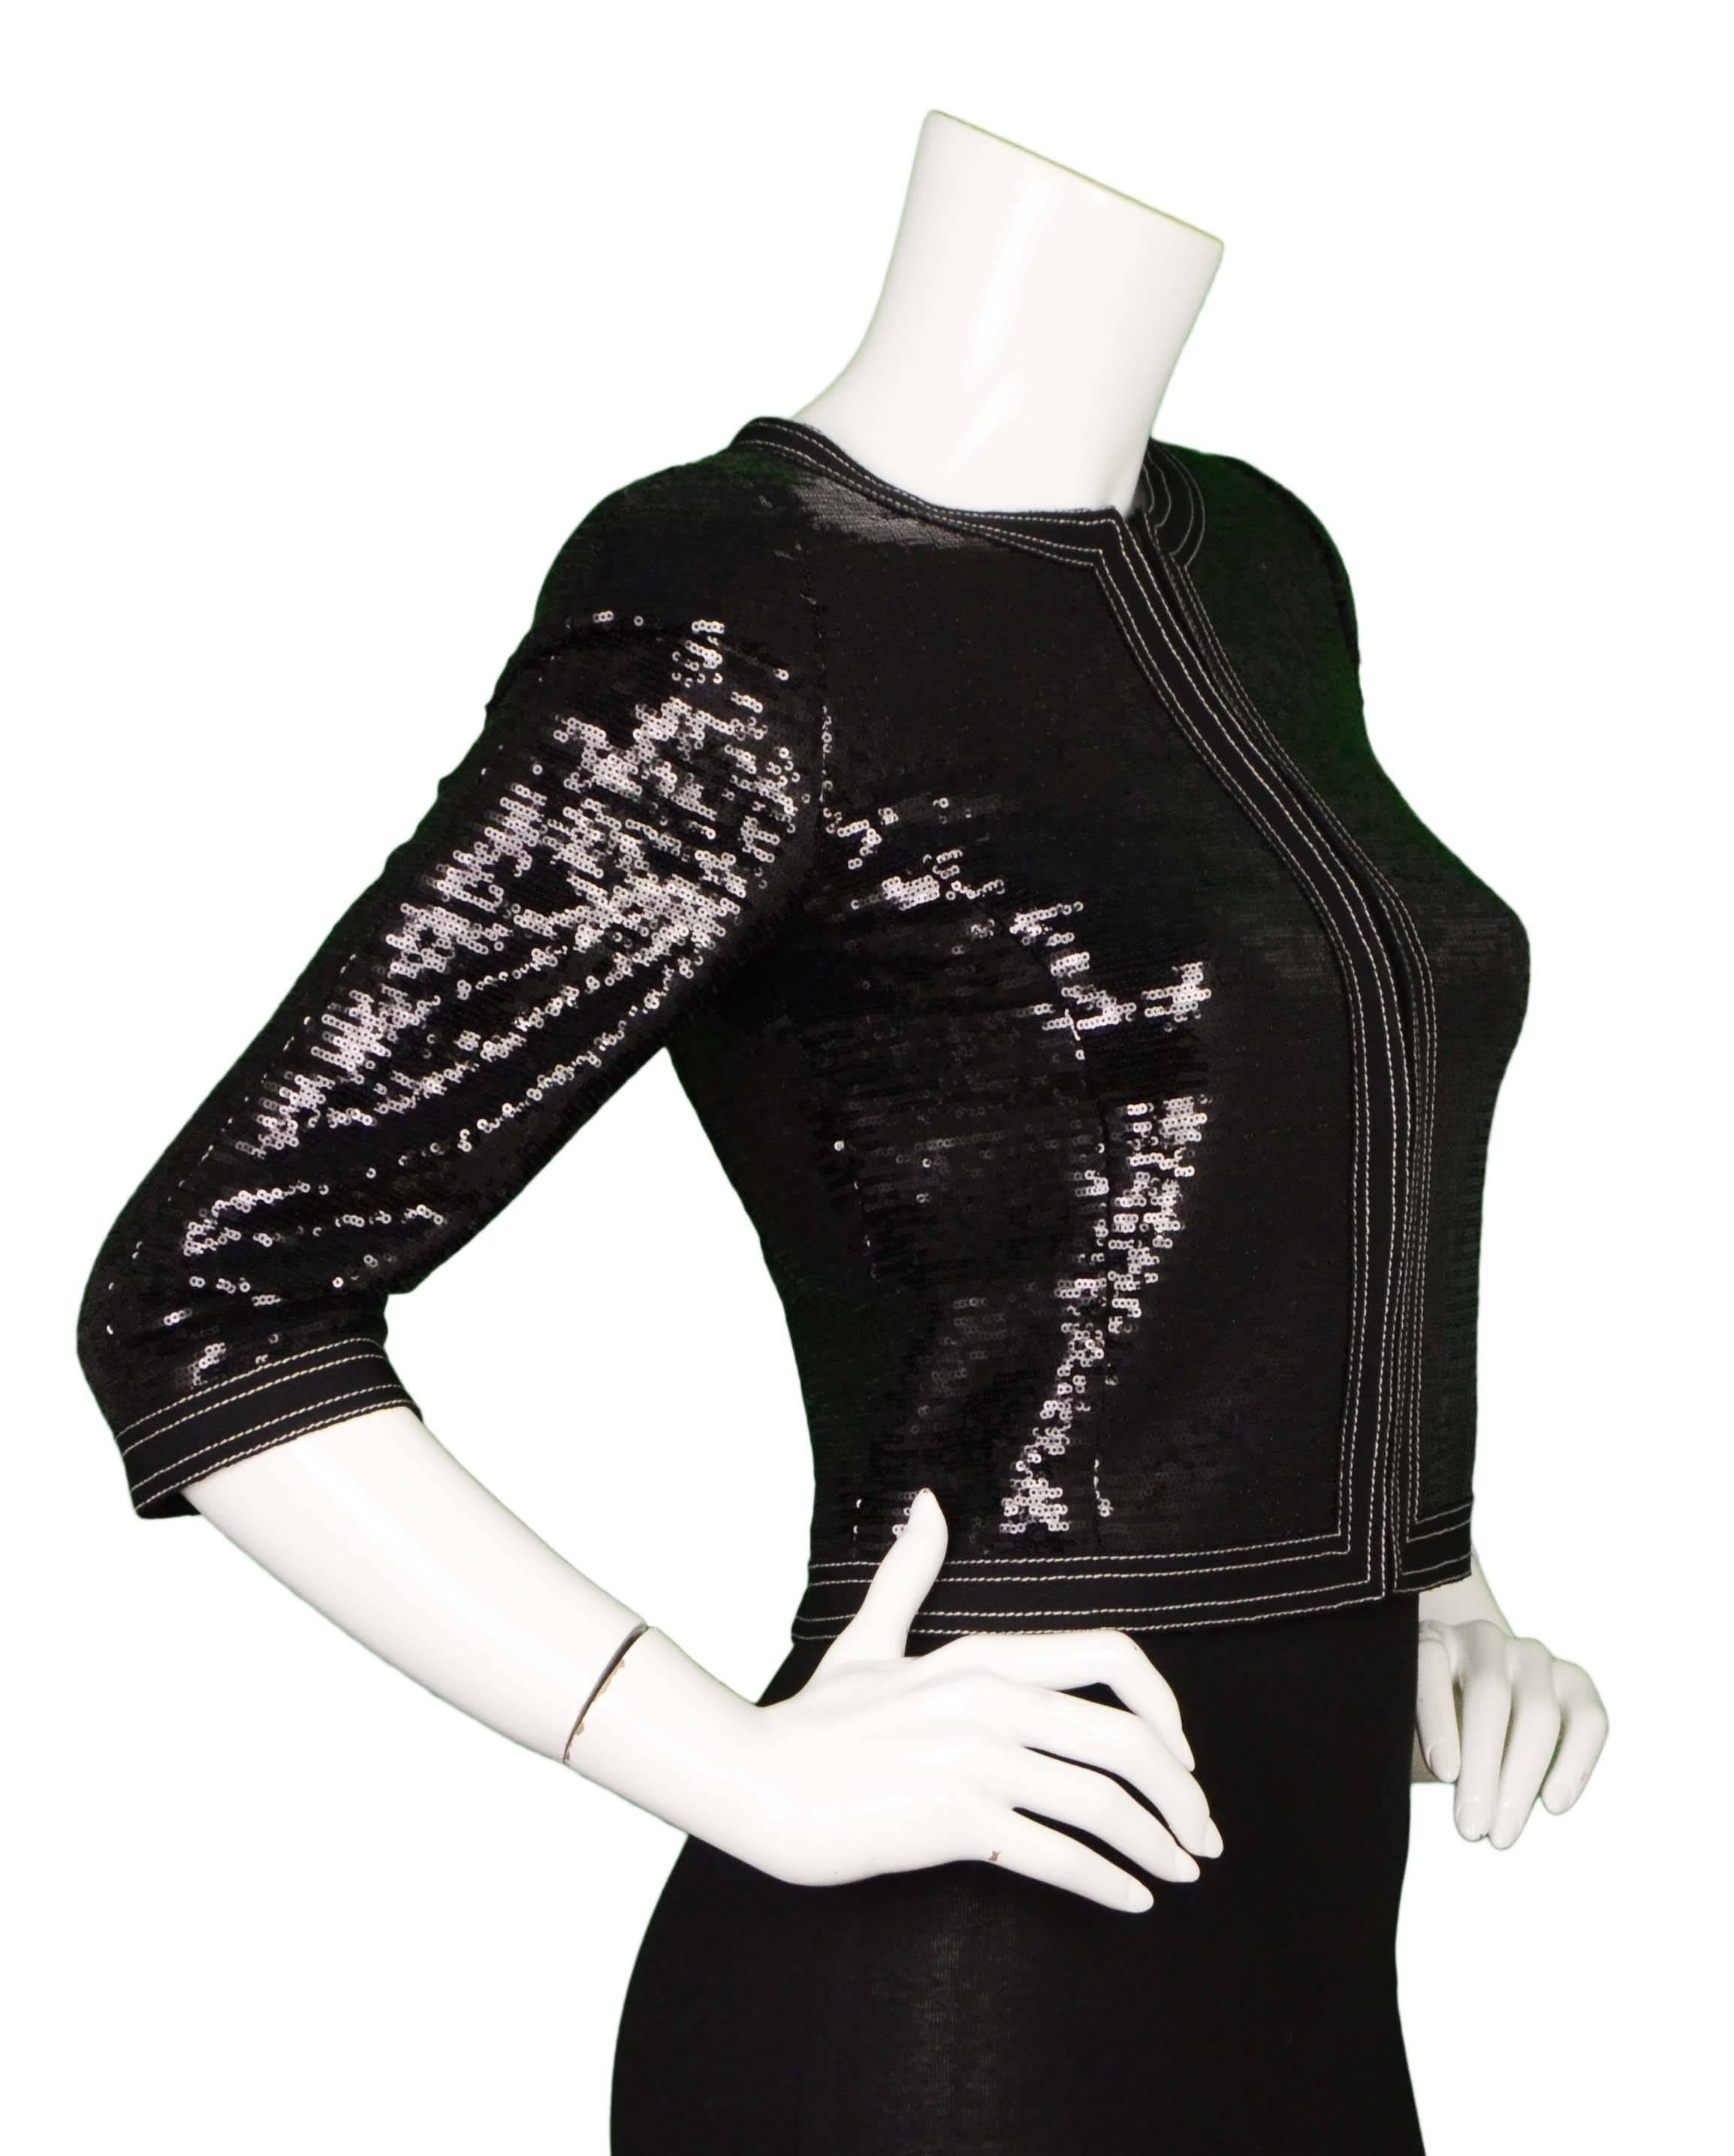 Chanel Black Sequin Cropped Evening Jacket 
Features black grosgrain trim
Made In: France
Color: Black
Composition: 100% polyester
Lining: Black, 100% silk
Closure/Opening: Zip front closure
Exterior Pockets: None
Interior Pockets: